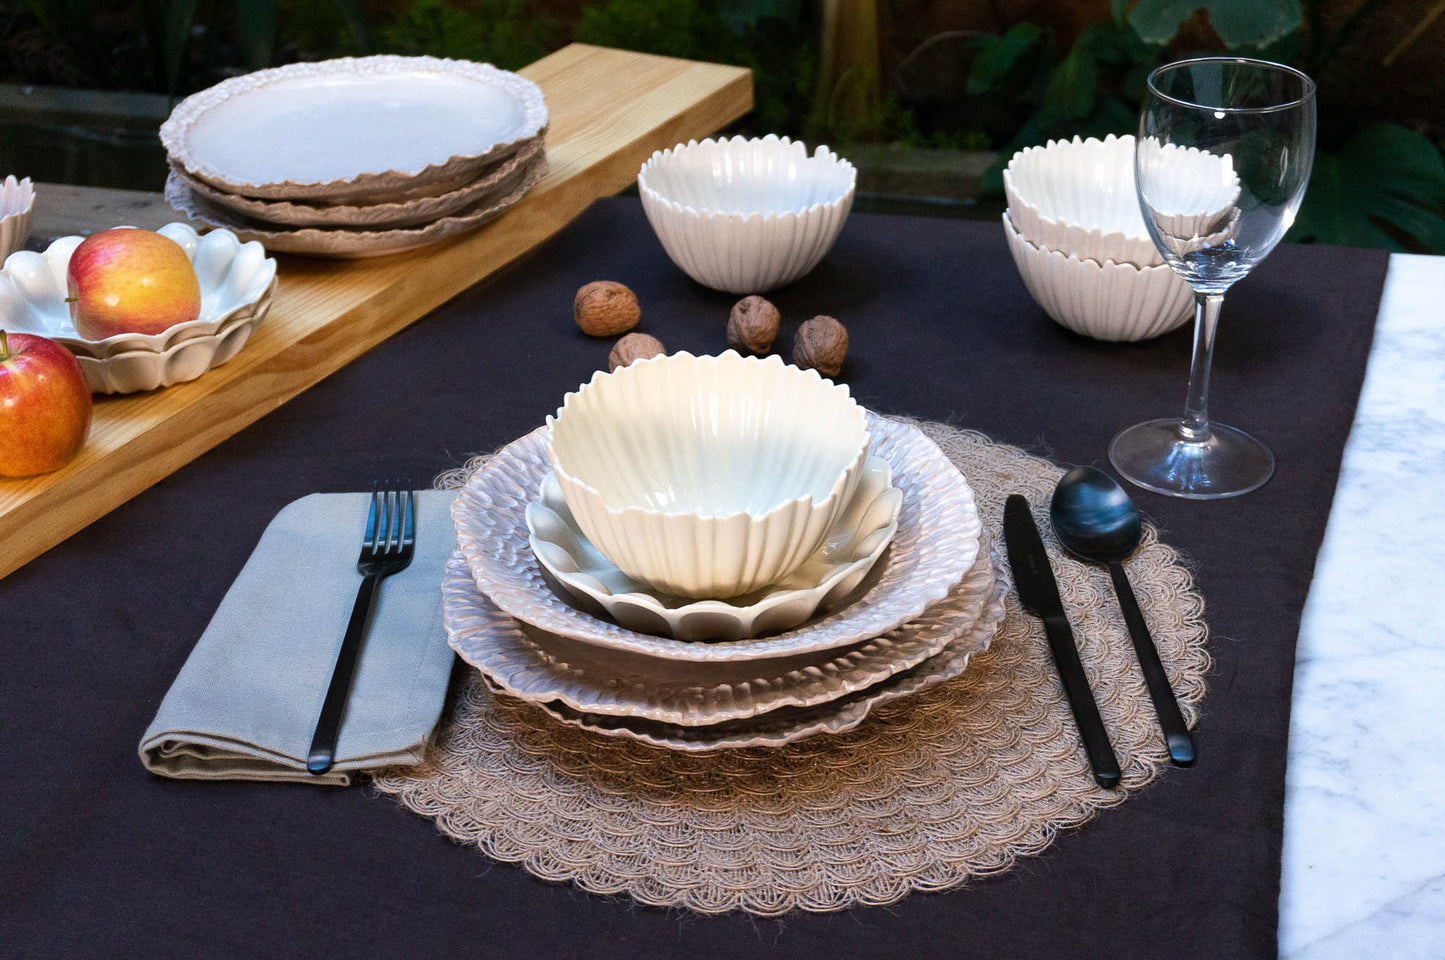 Textured Rim 5-Piece Place Setting | Table Setting